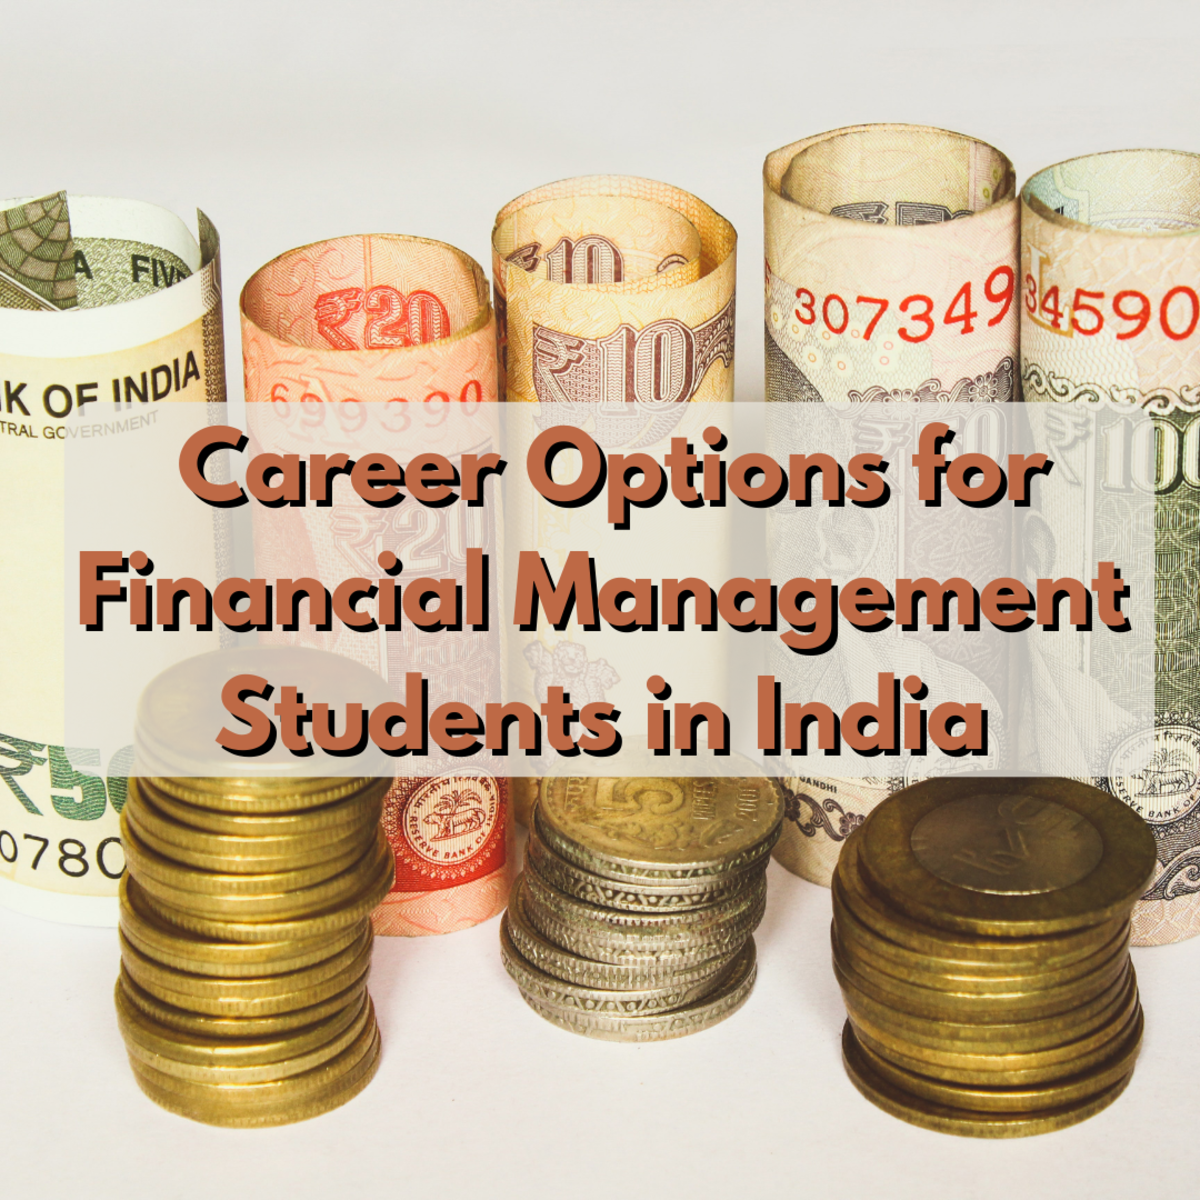 Read on to learn all about the career options available for financial management students in India, including the roles of financial analyst, investment banker, and more! Plus, you’ll also find advice for seeking professional mentors!